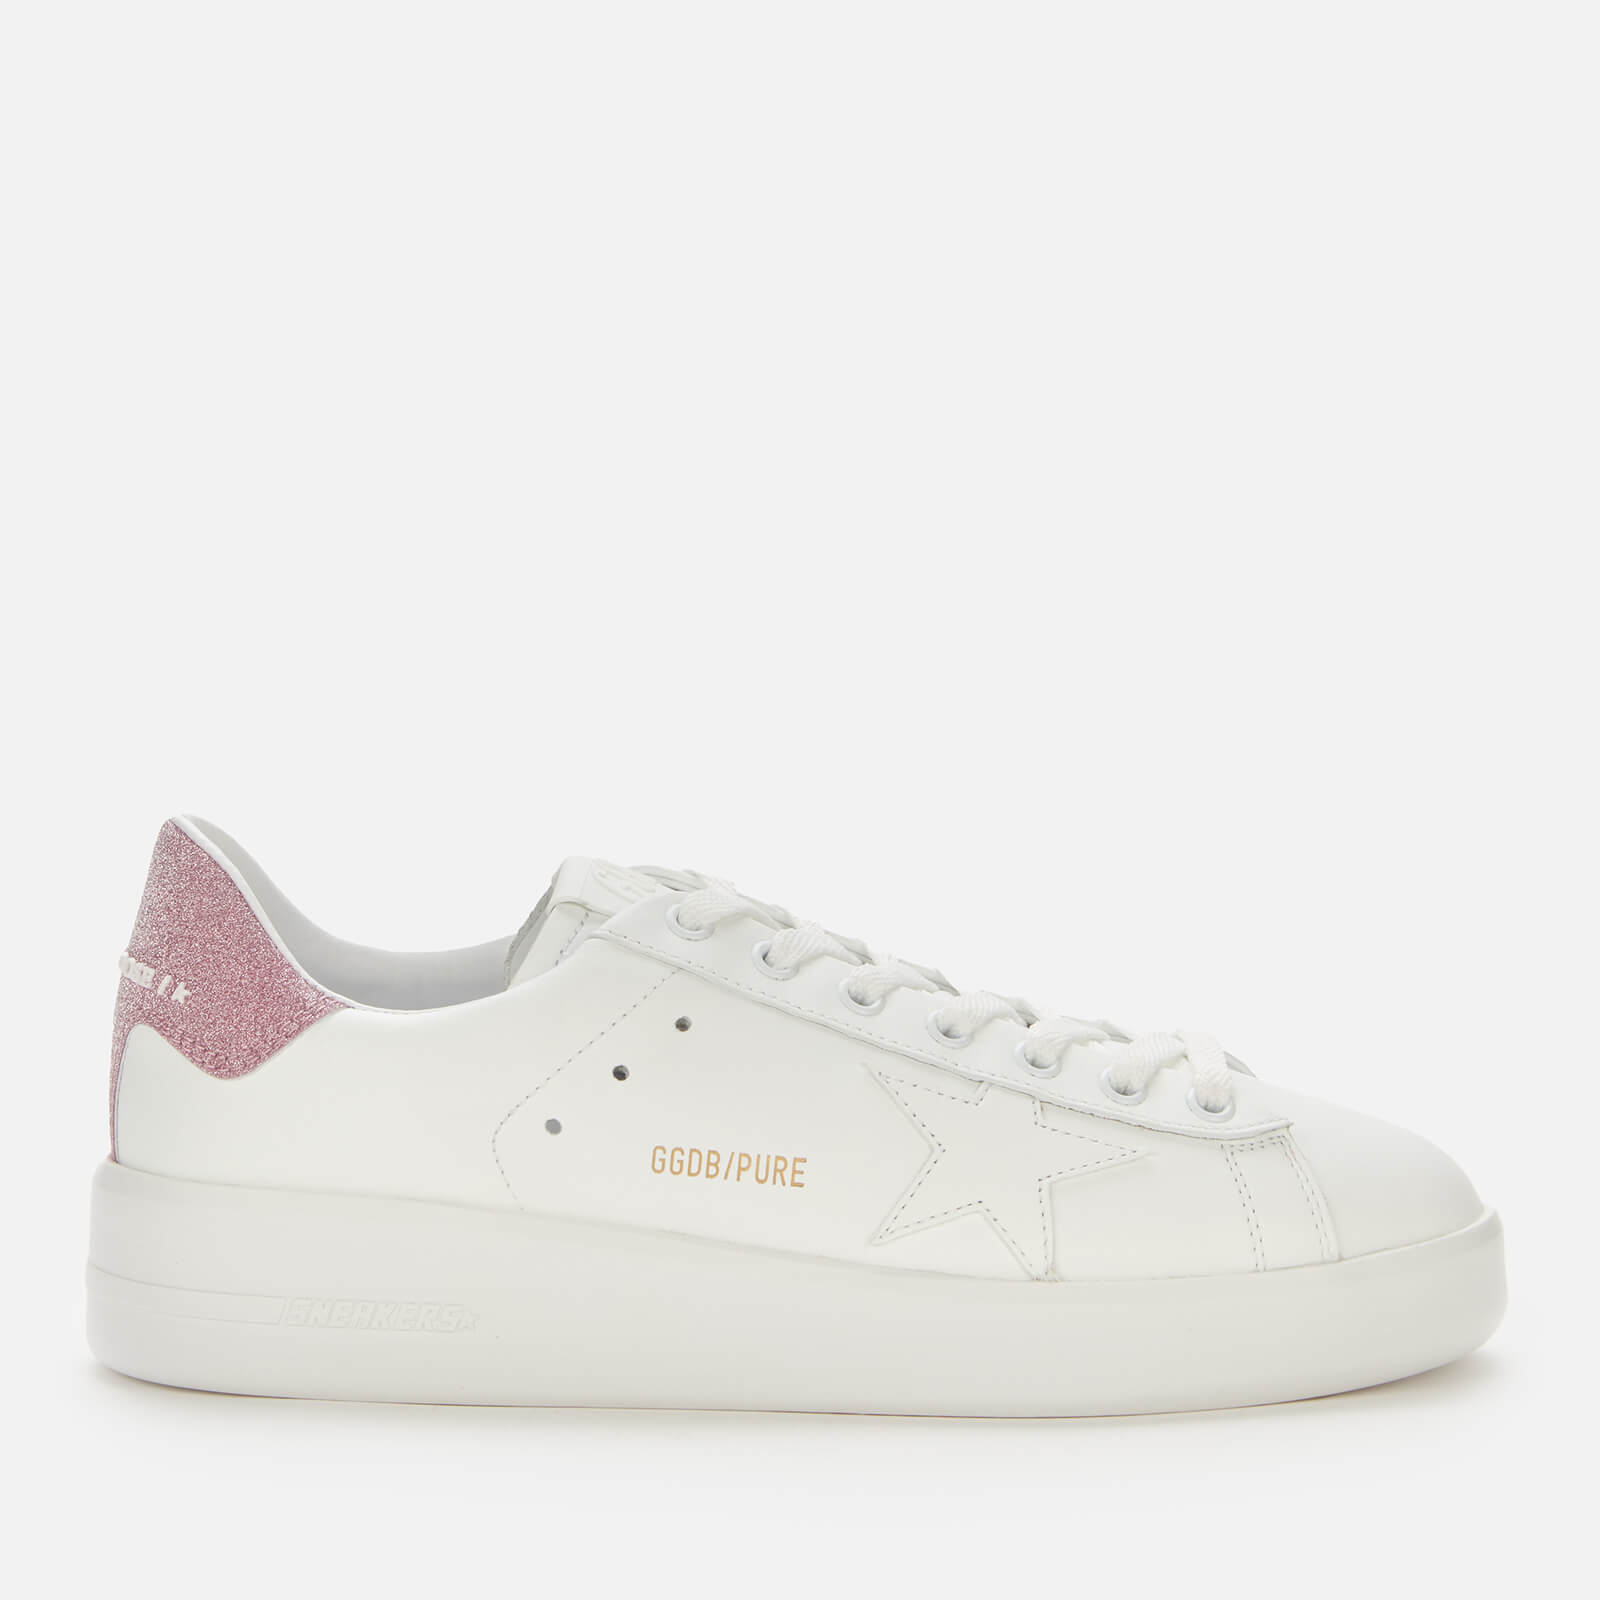 Golden Goose Deluxe Brand Women's Pure Star Leaather Chunky Trainers - White/Pink - UK 8